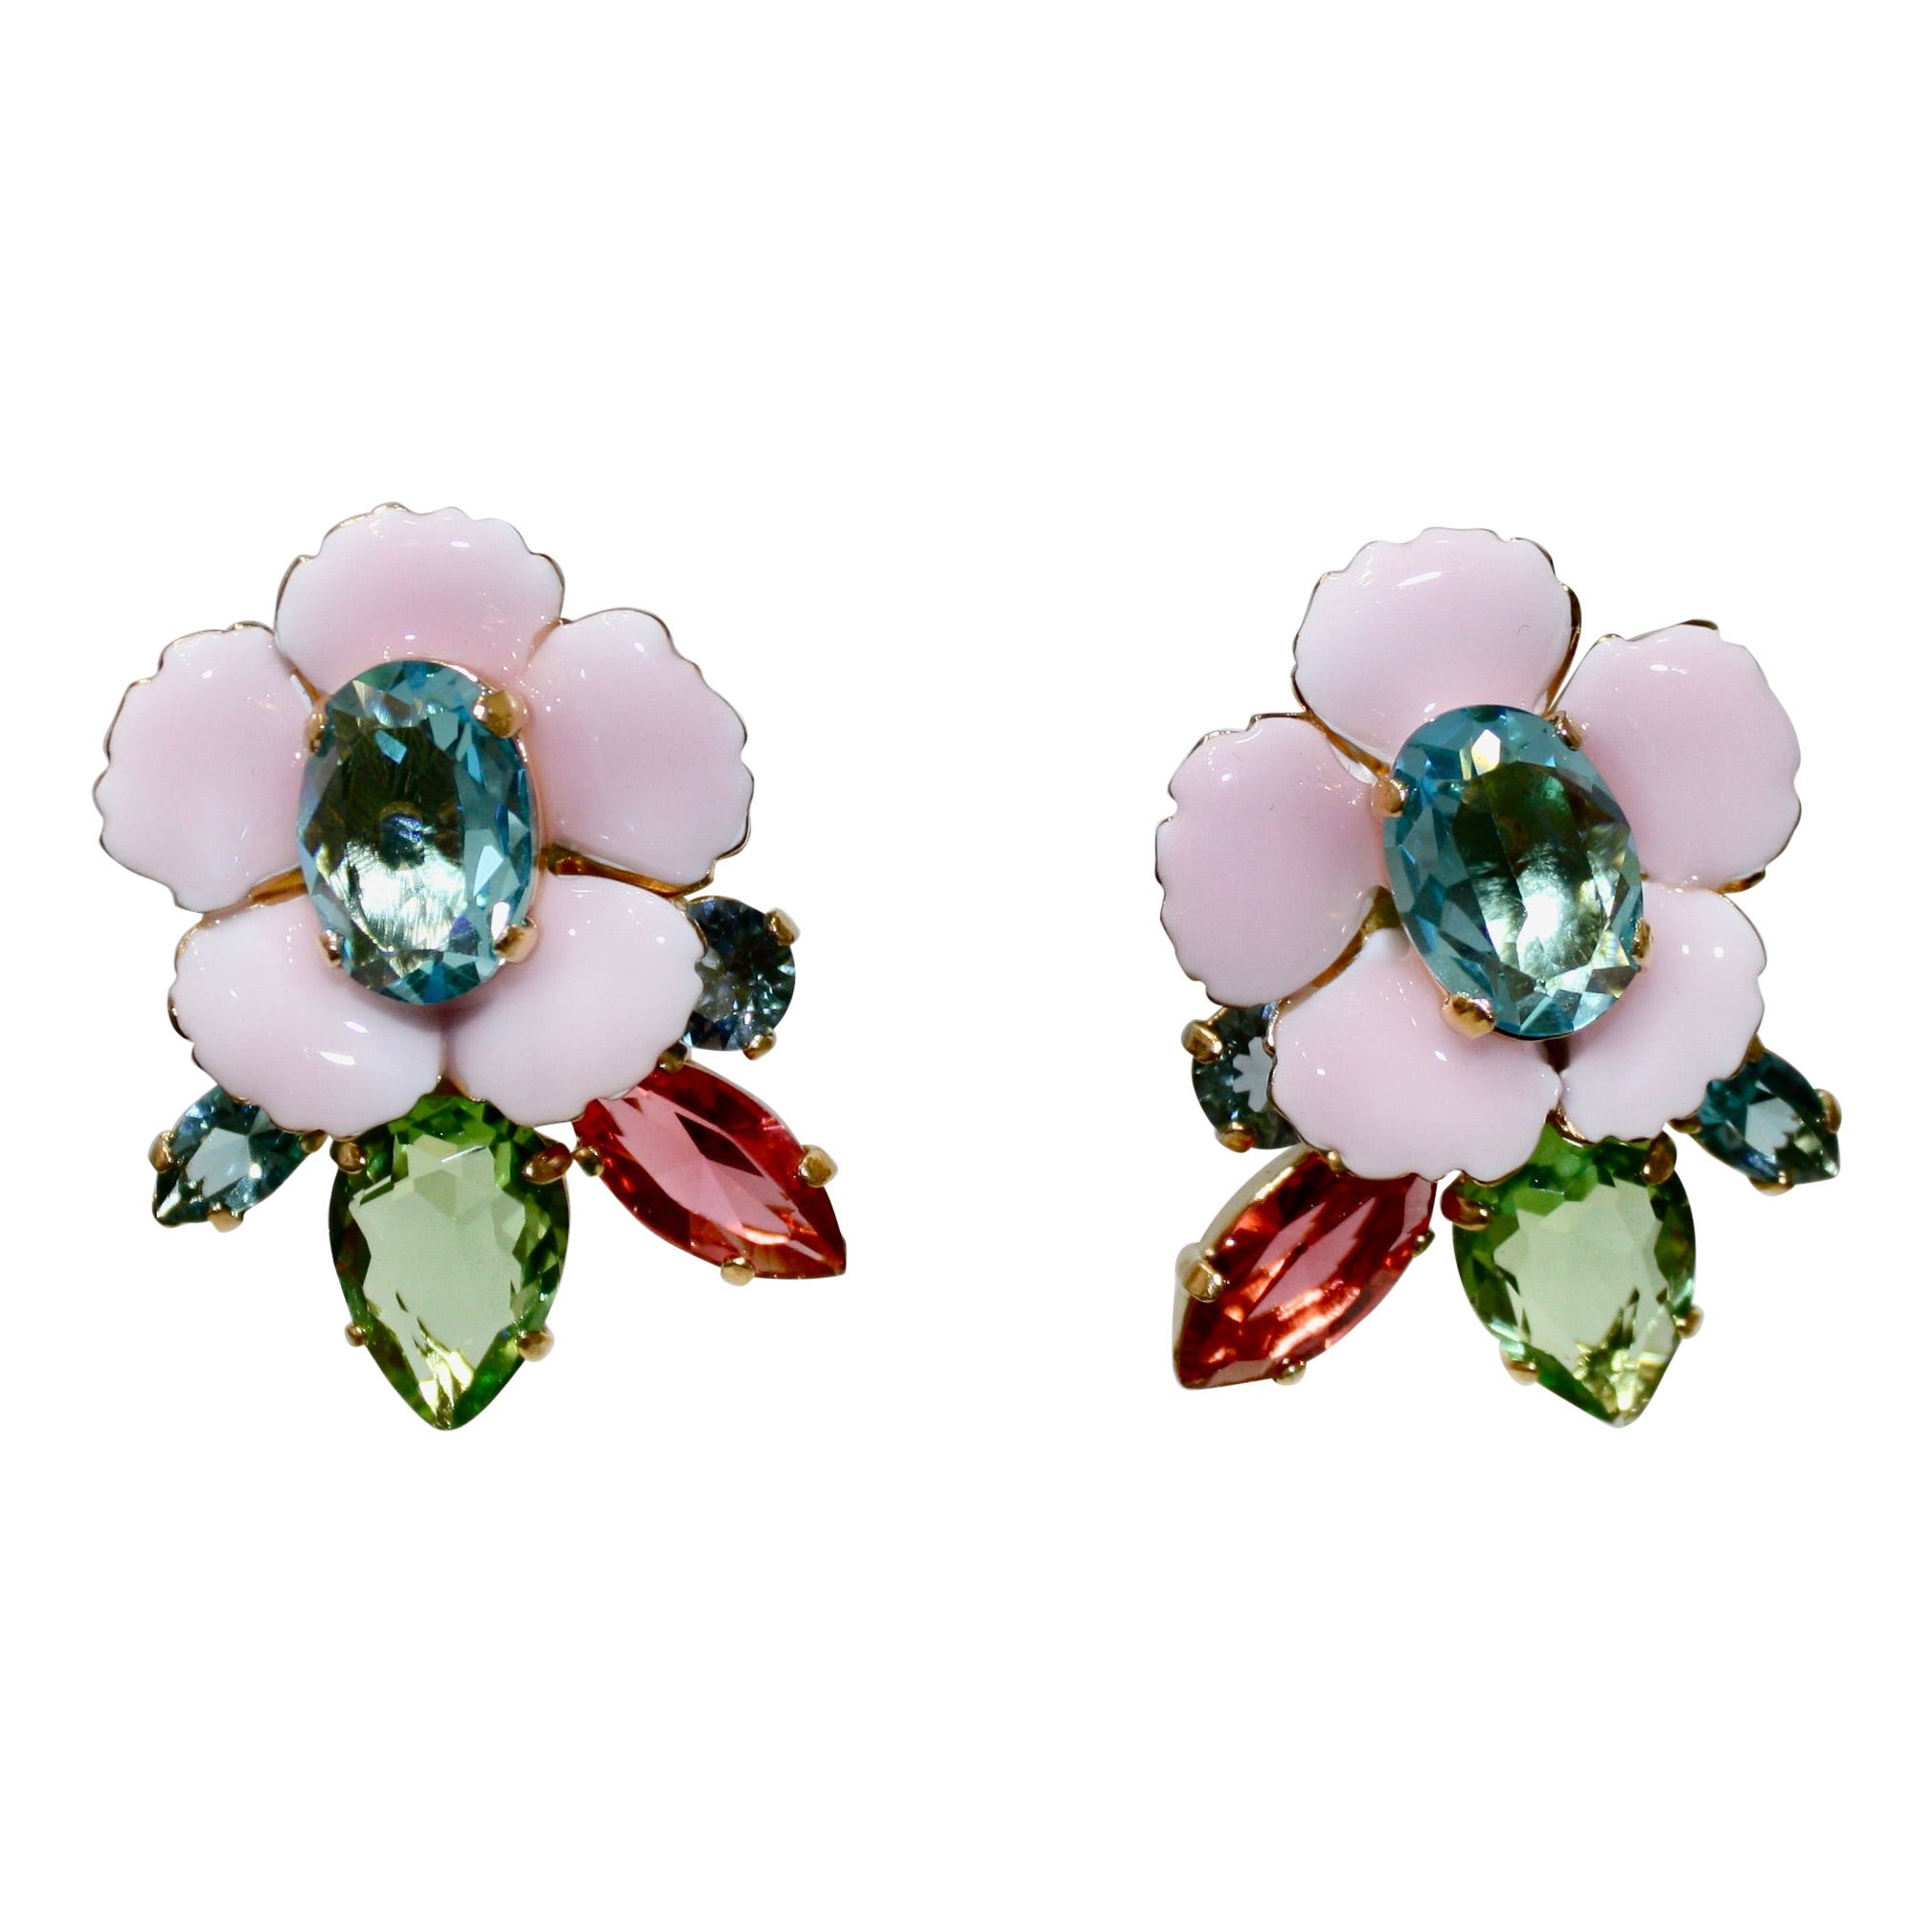 From Philippe Ferrandis collection, these earrings are made with enamel and Swarovski crystal . Gilded brass metal

Philippe Ferrandis has been a parurier in Paris since 1986. He creates two collections a year, always different and spectacular